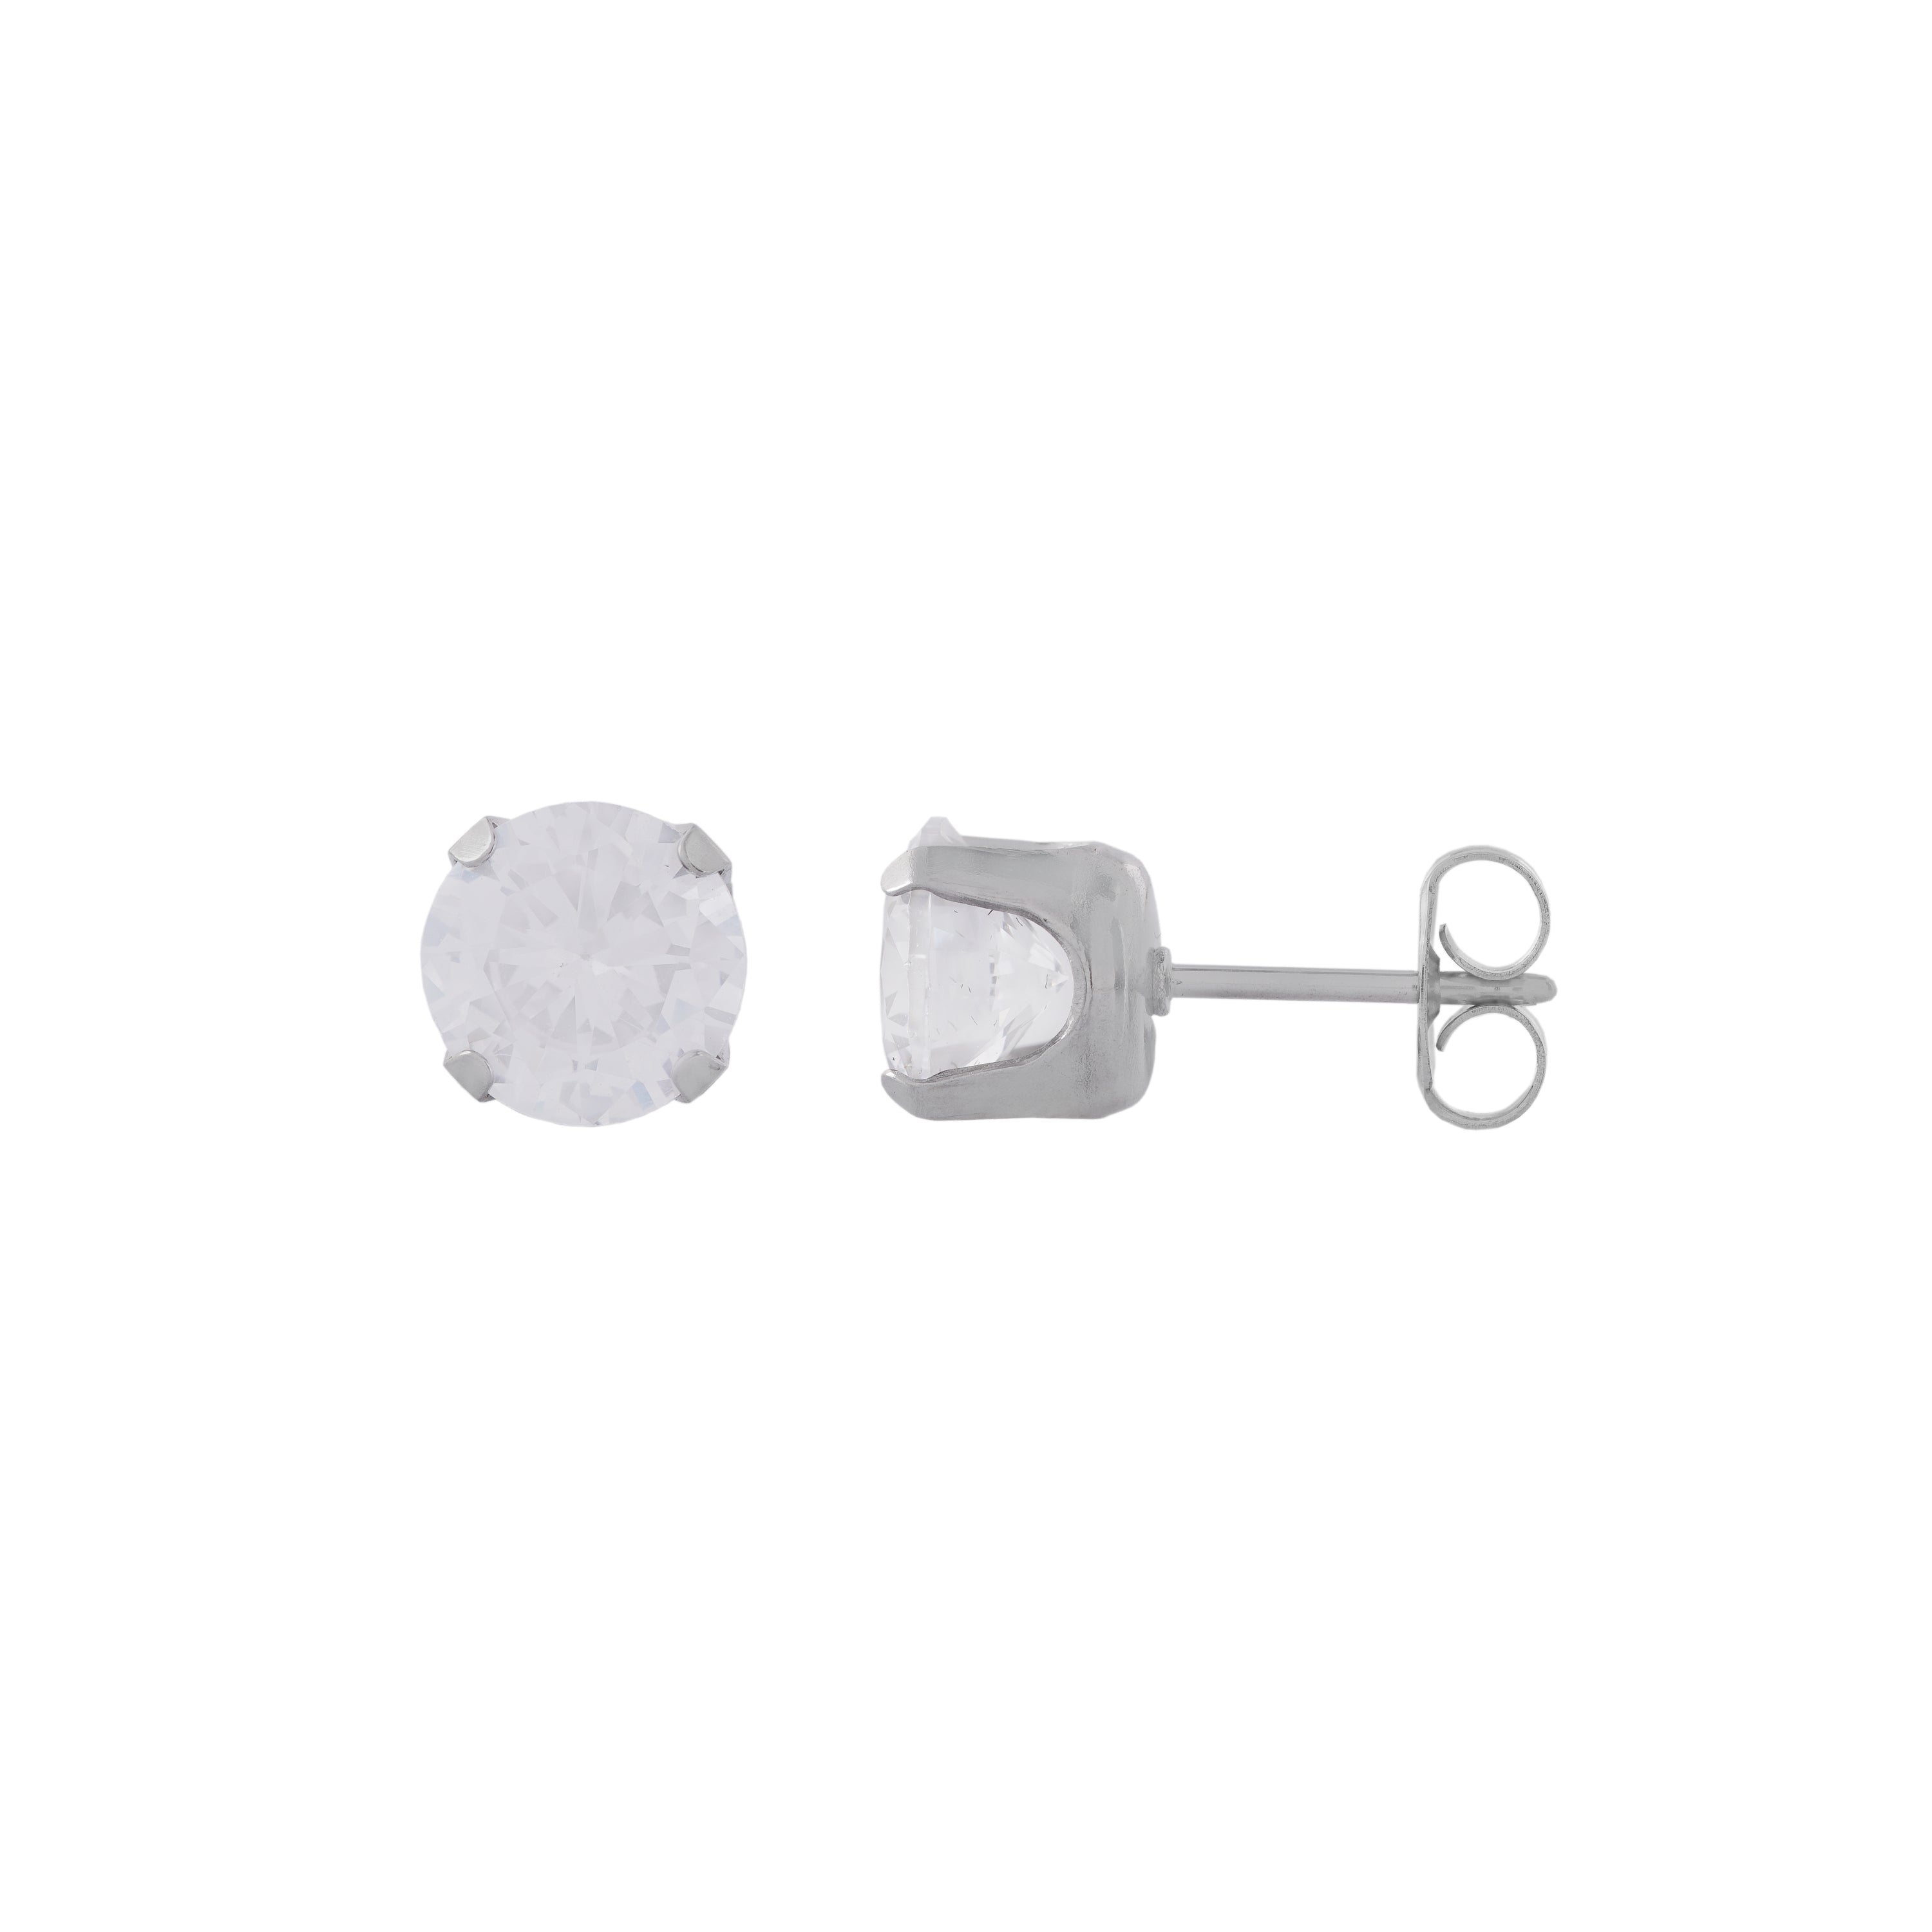 7MM Cubic Zirconia Allergy free Stainless Steel Ear Studs | MADE IN USA | Ideal for everyday wear